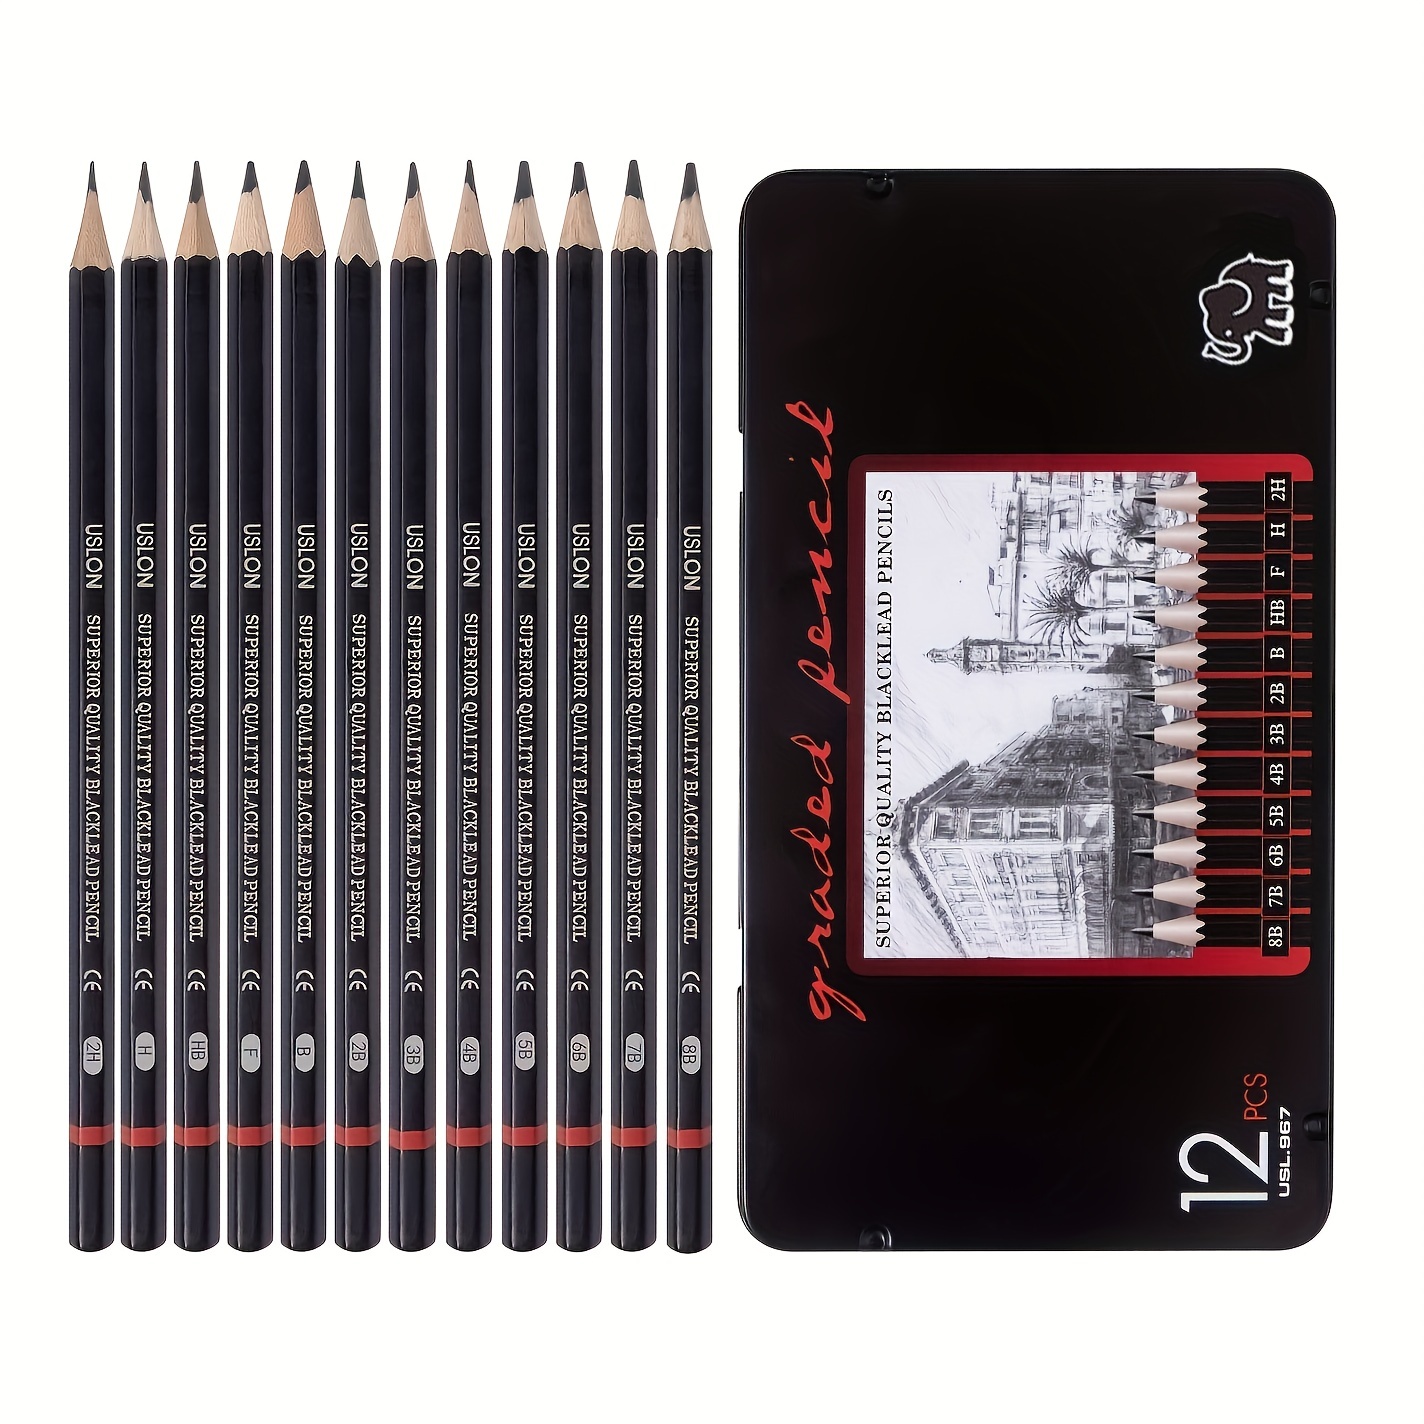 12 Graded Pencils Drawing Sketching Tones Shades Art Artist Picture Pencil  Draw.